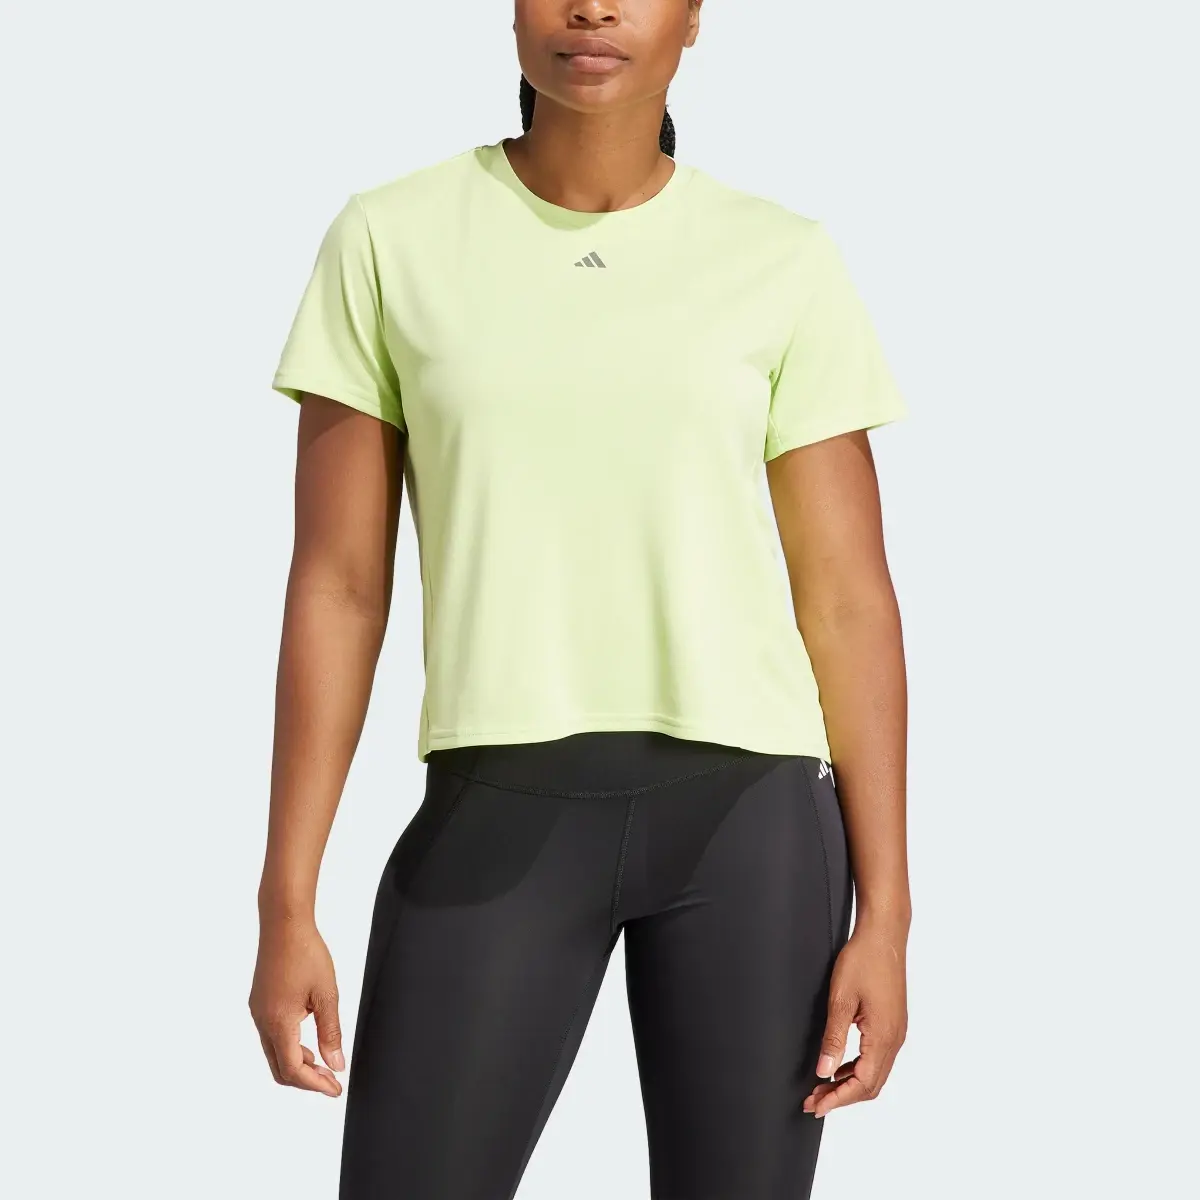 Adidas HIIT HEAT.RDY Sweat-Conceal Training T-Shirt. 1